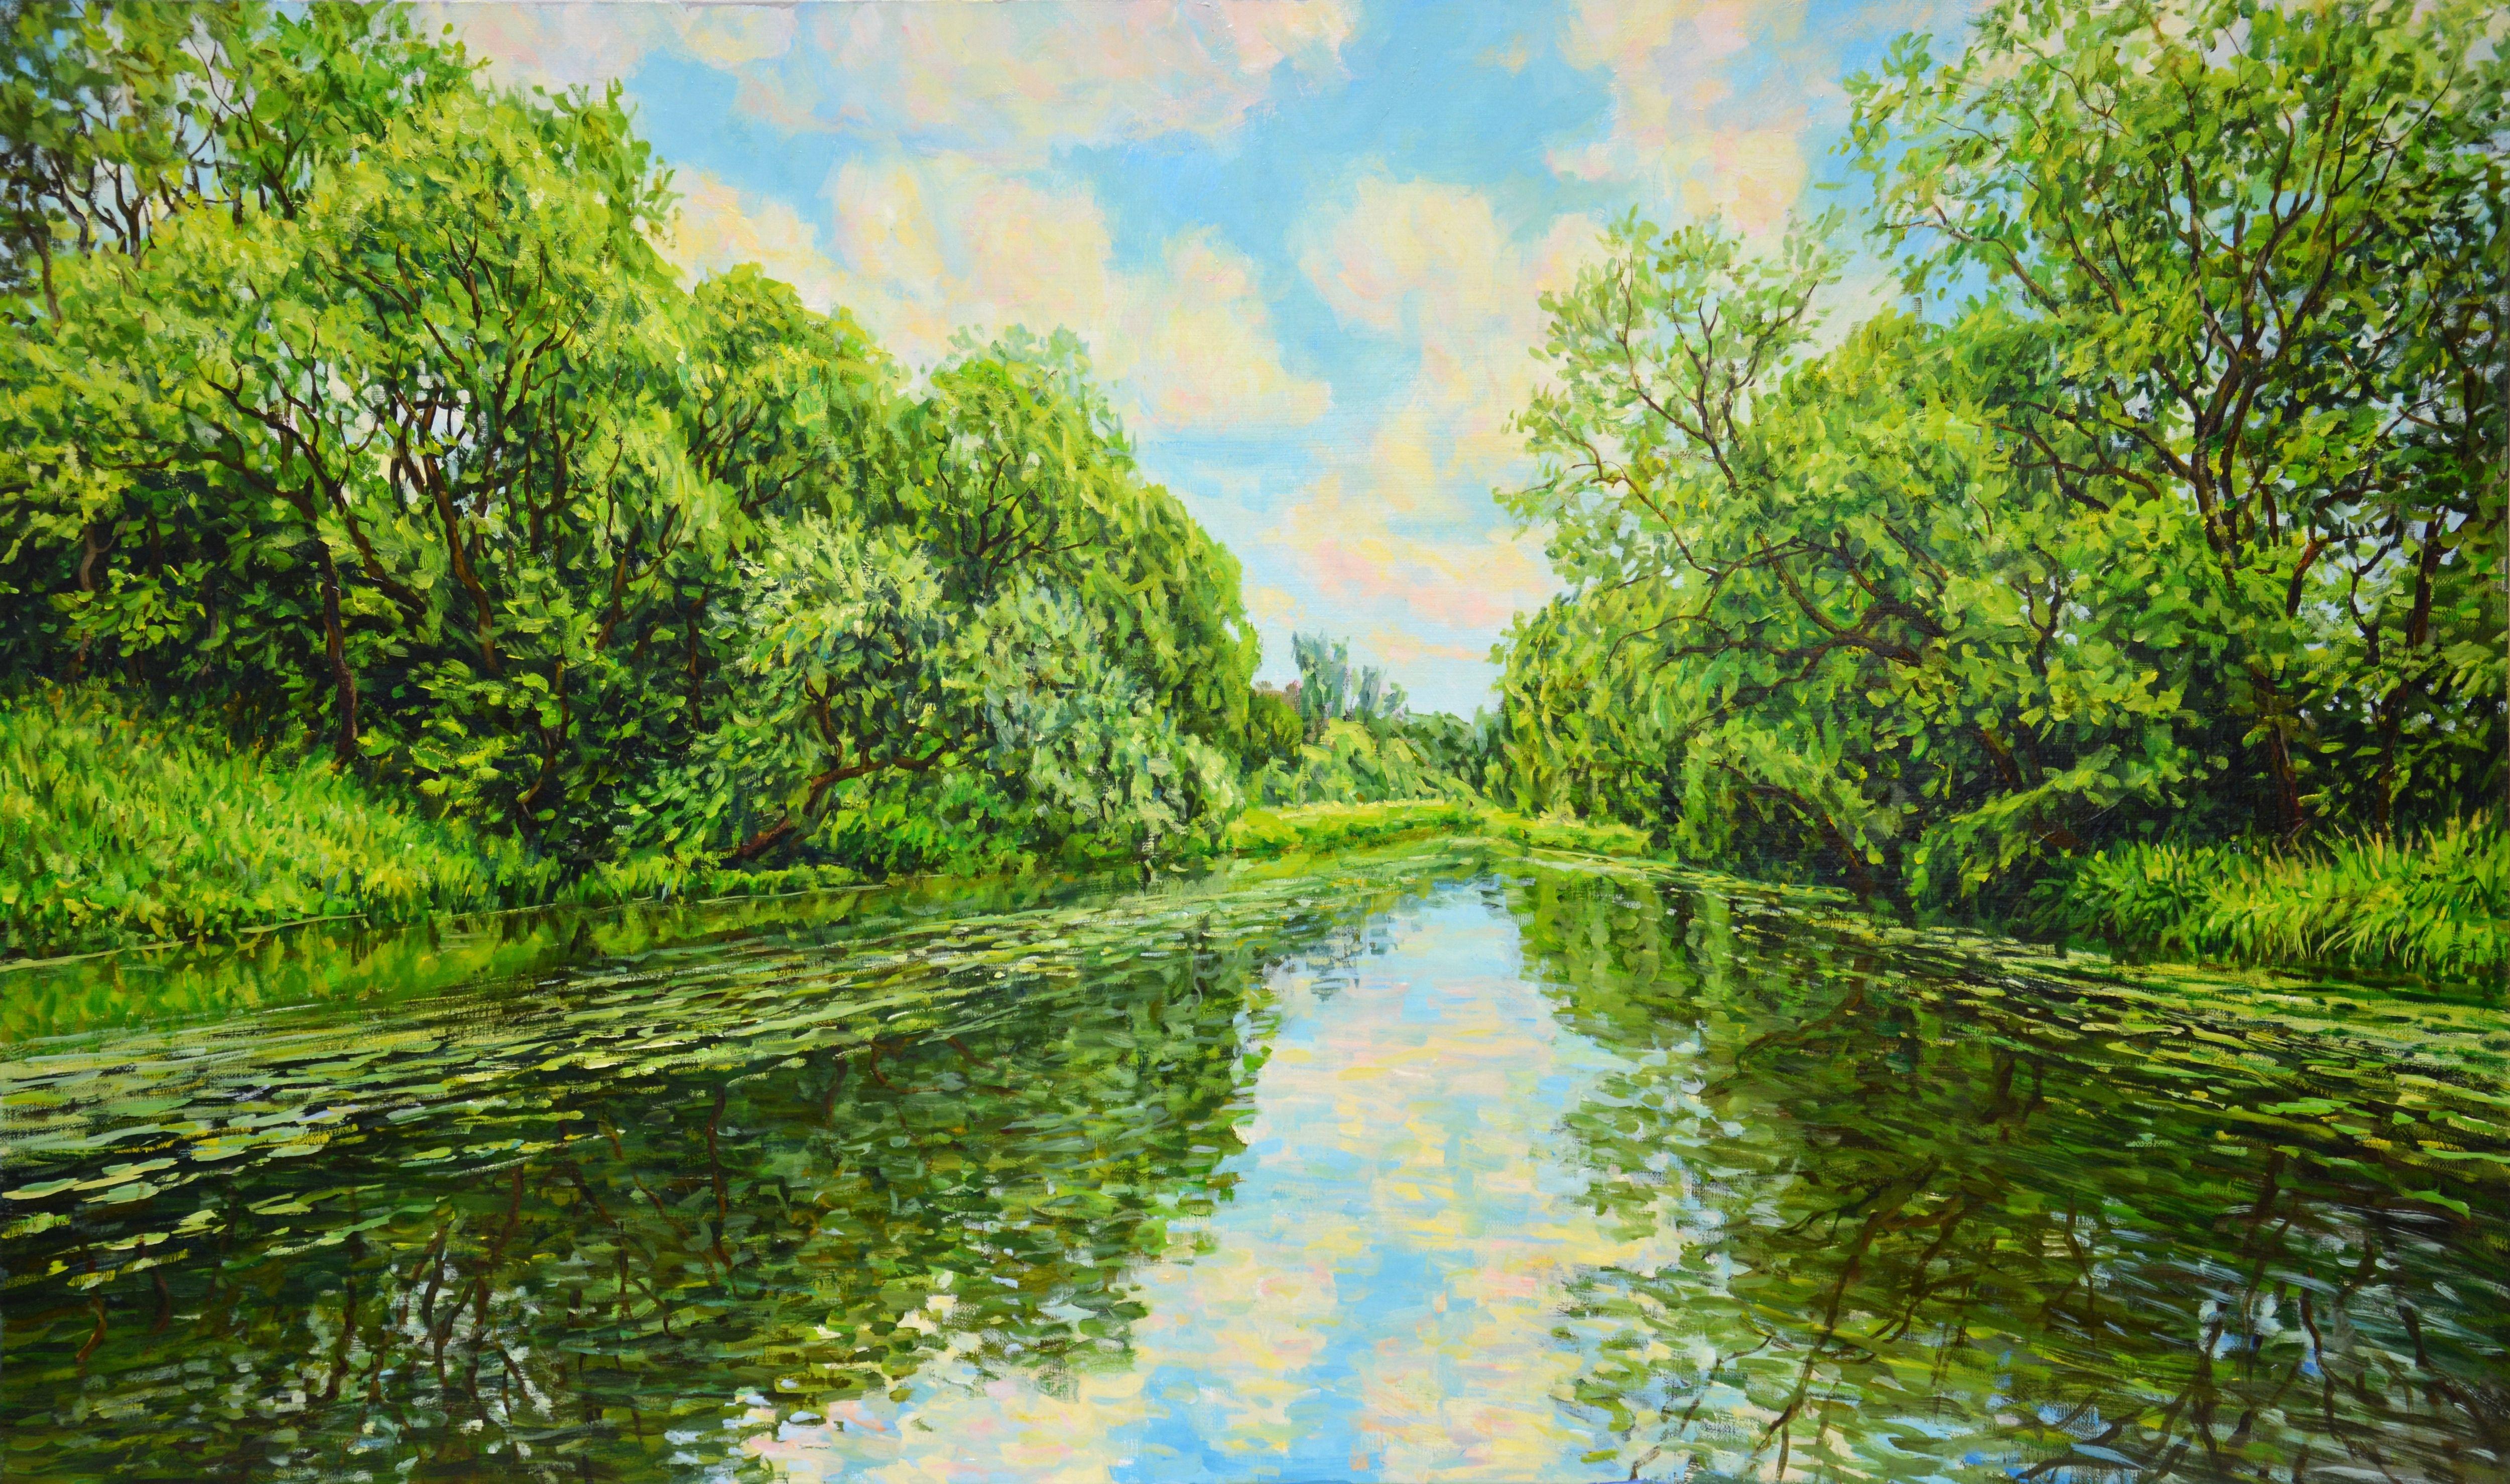 Painting Summer landscape. Nature is an inexhaustible source of inspiration. The saturated palette of greenery, bushes, trees, grass, water, the reflection of the sky in the water cause a feeling of love and gratitude to nature. The picture has good